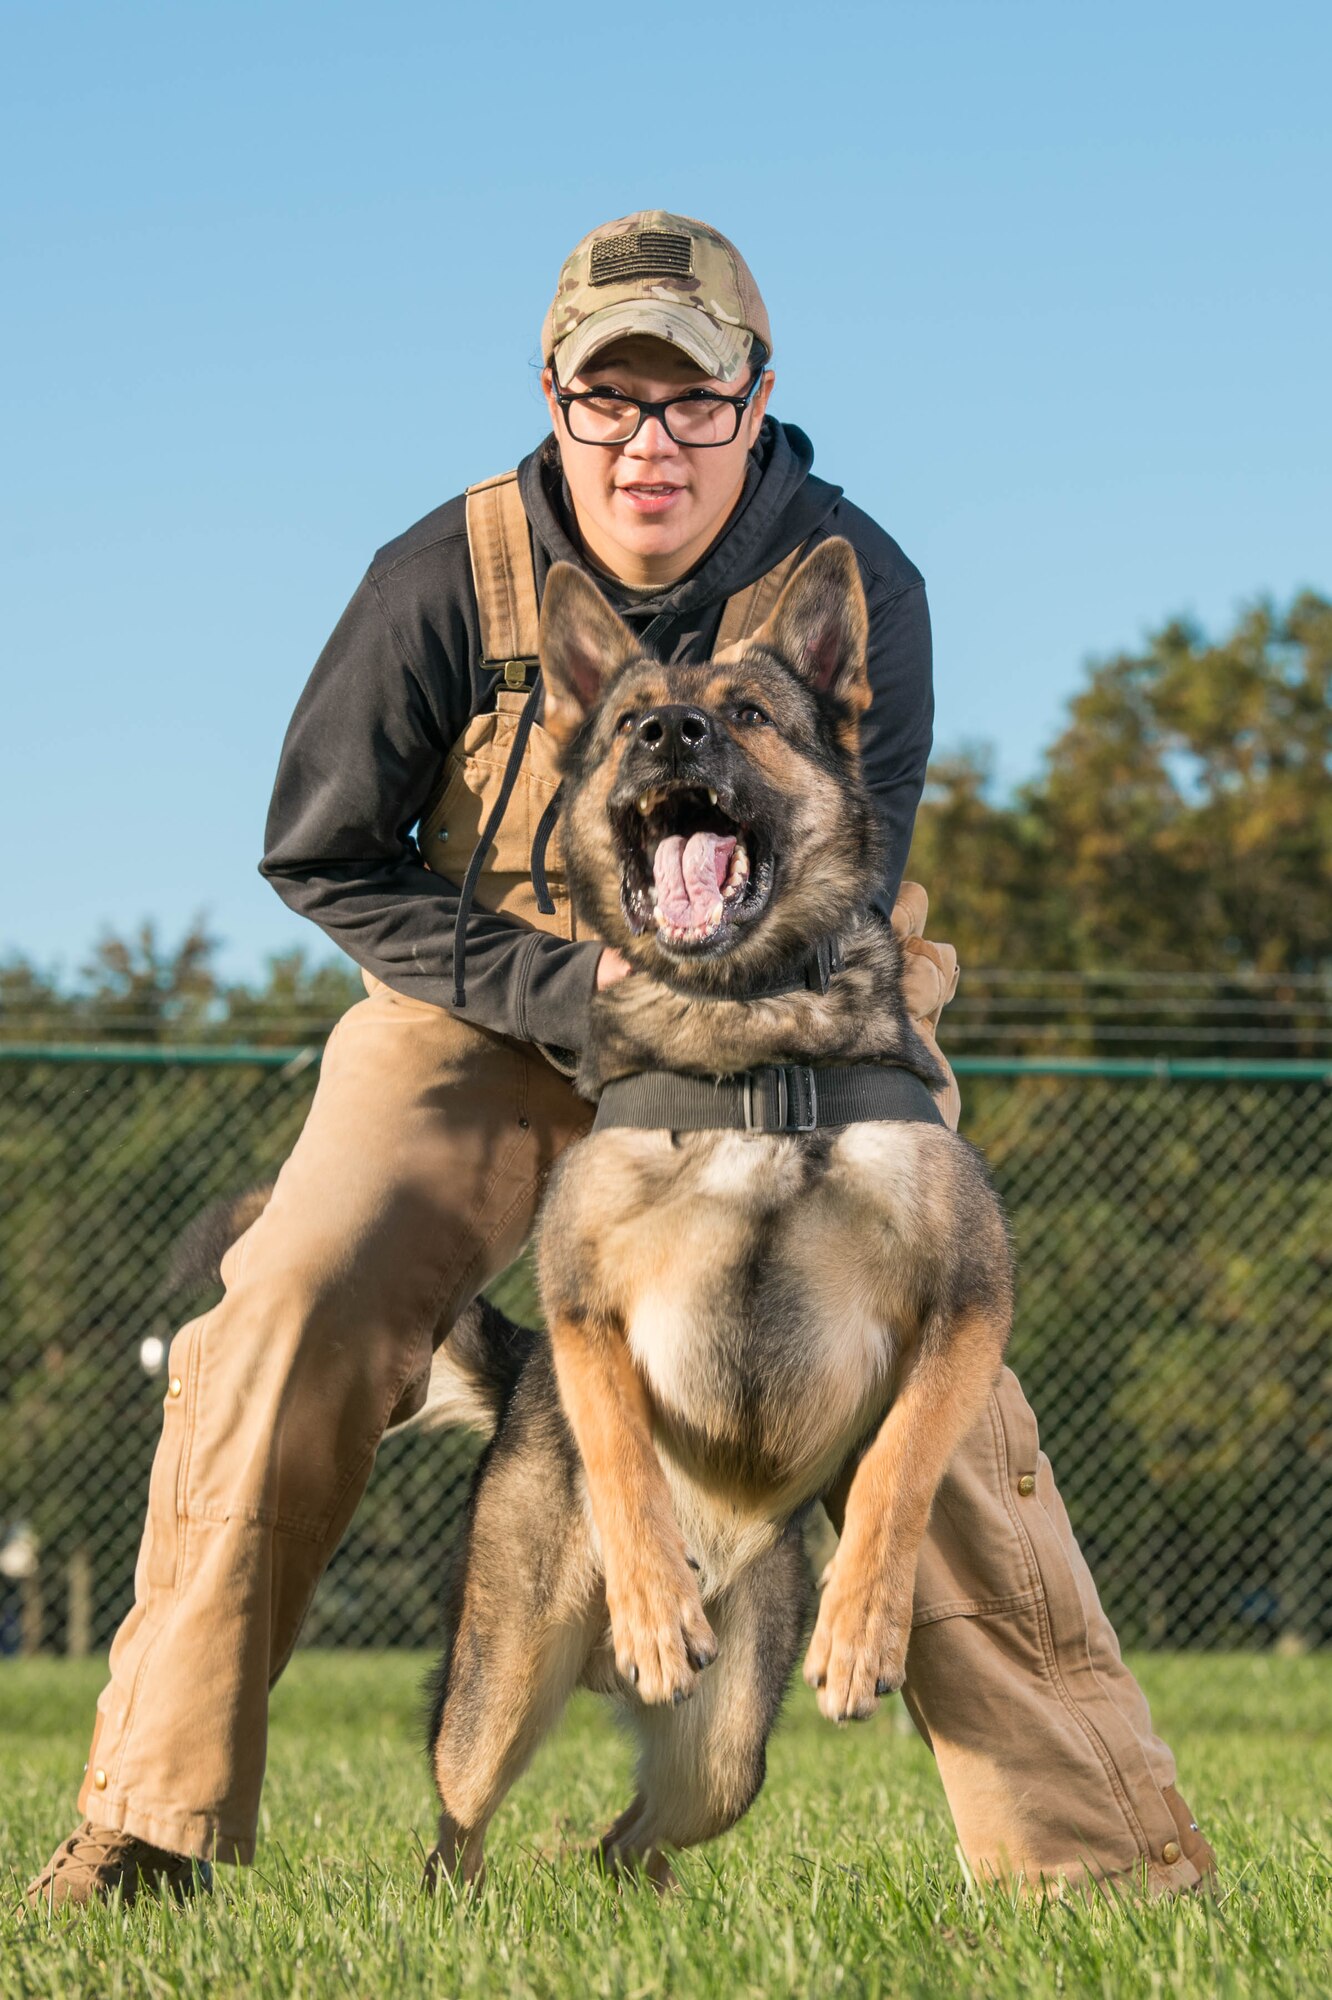 Senior Airman Theresa Braak, 436th Security Forces Squadron military working dog handler, and Military Working Dog Sam conduct pursuit-and-attack training Oct. 8, 2020, at Dover Air Force Base, Delaware. Based on their strengths, the MWDs are trained and certified to conduct patrol work, detection of improvised explosive devices or detection of contraband. (U.S. Air Force photo by Mauricio Campino)